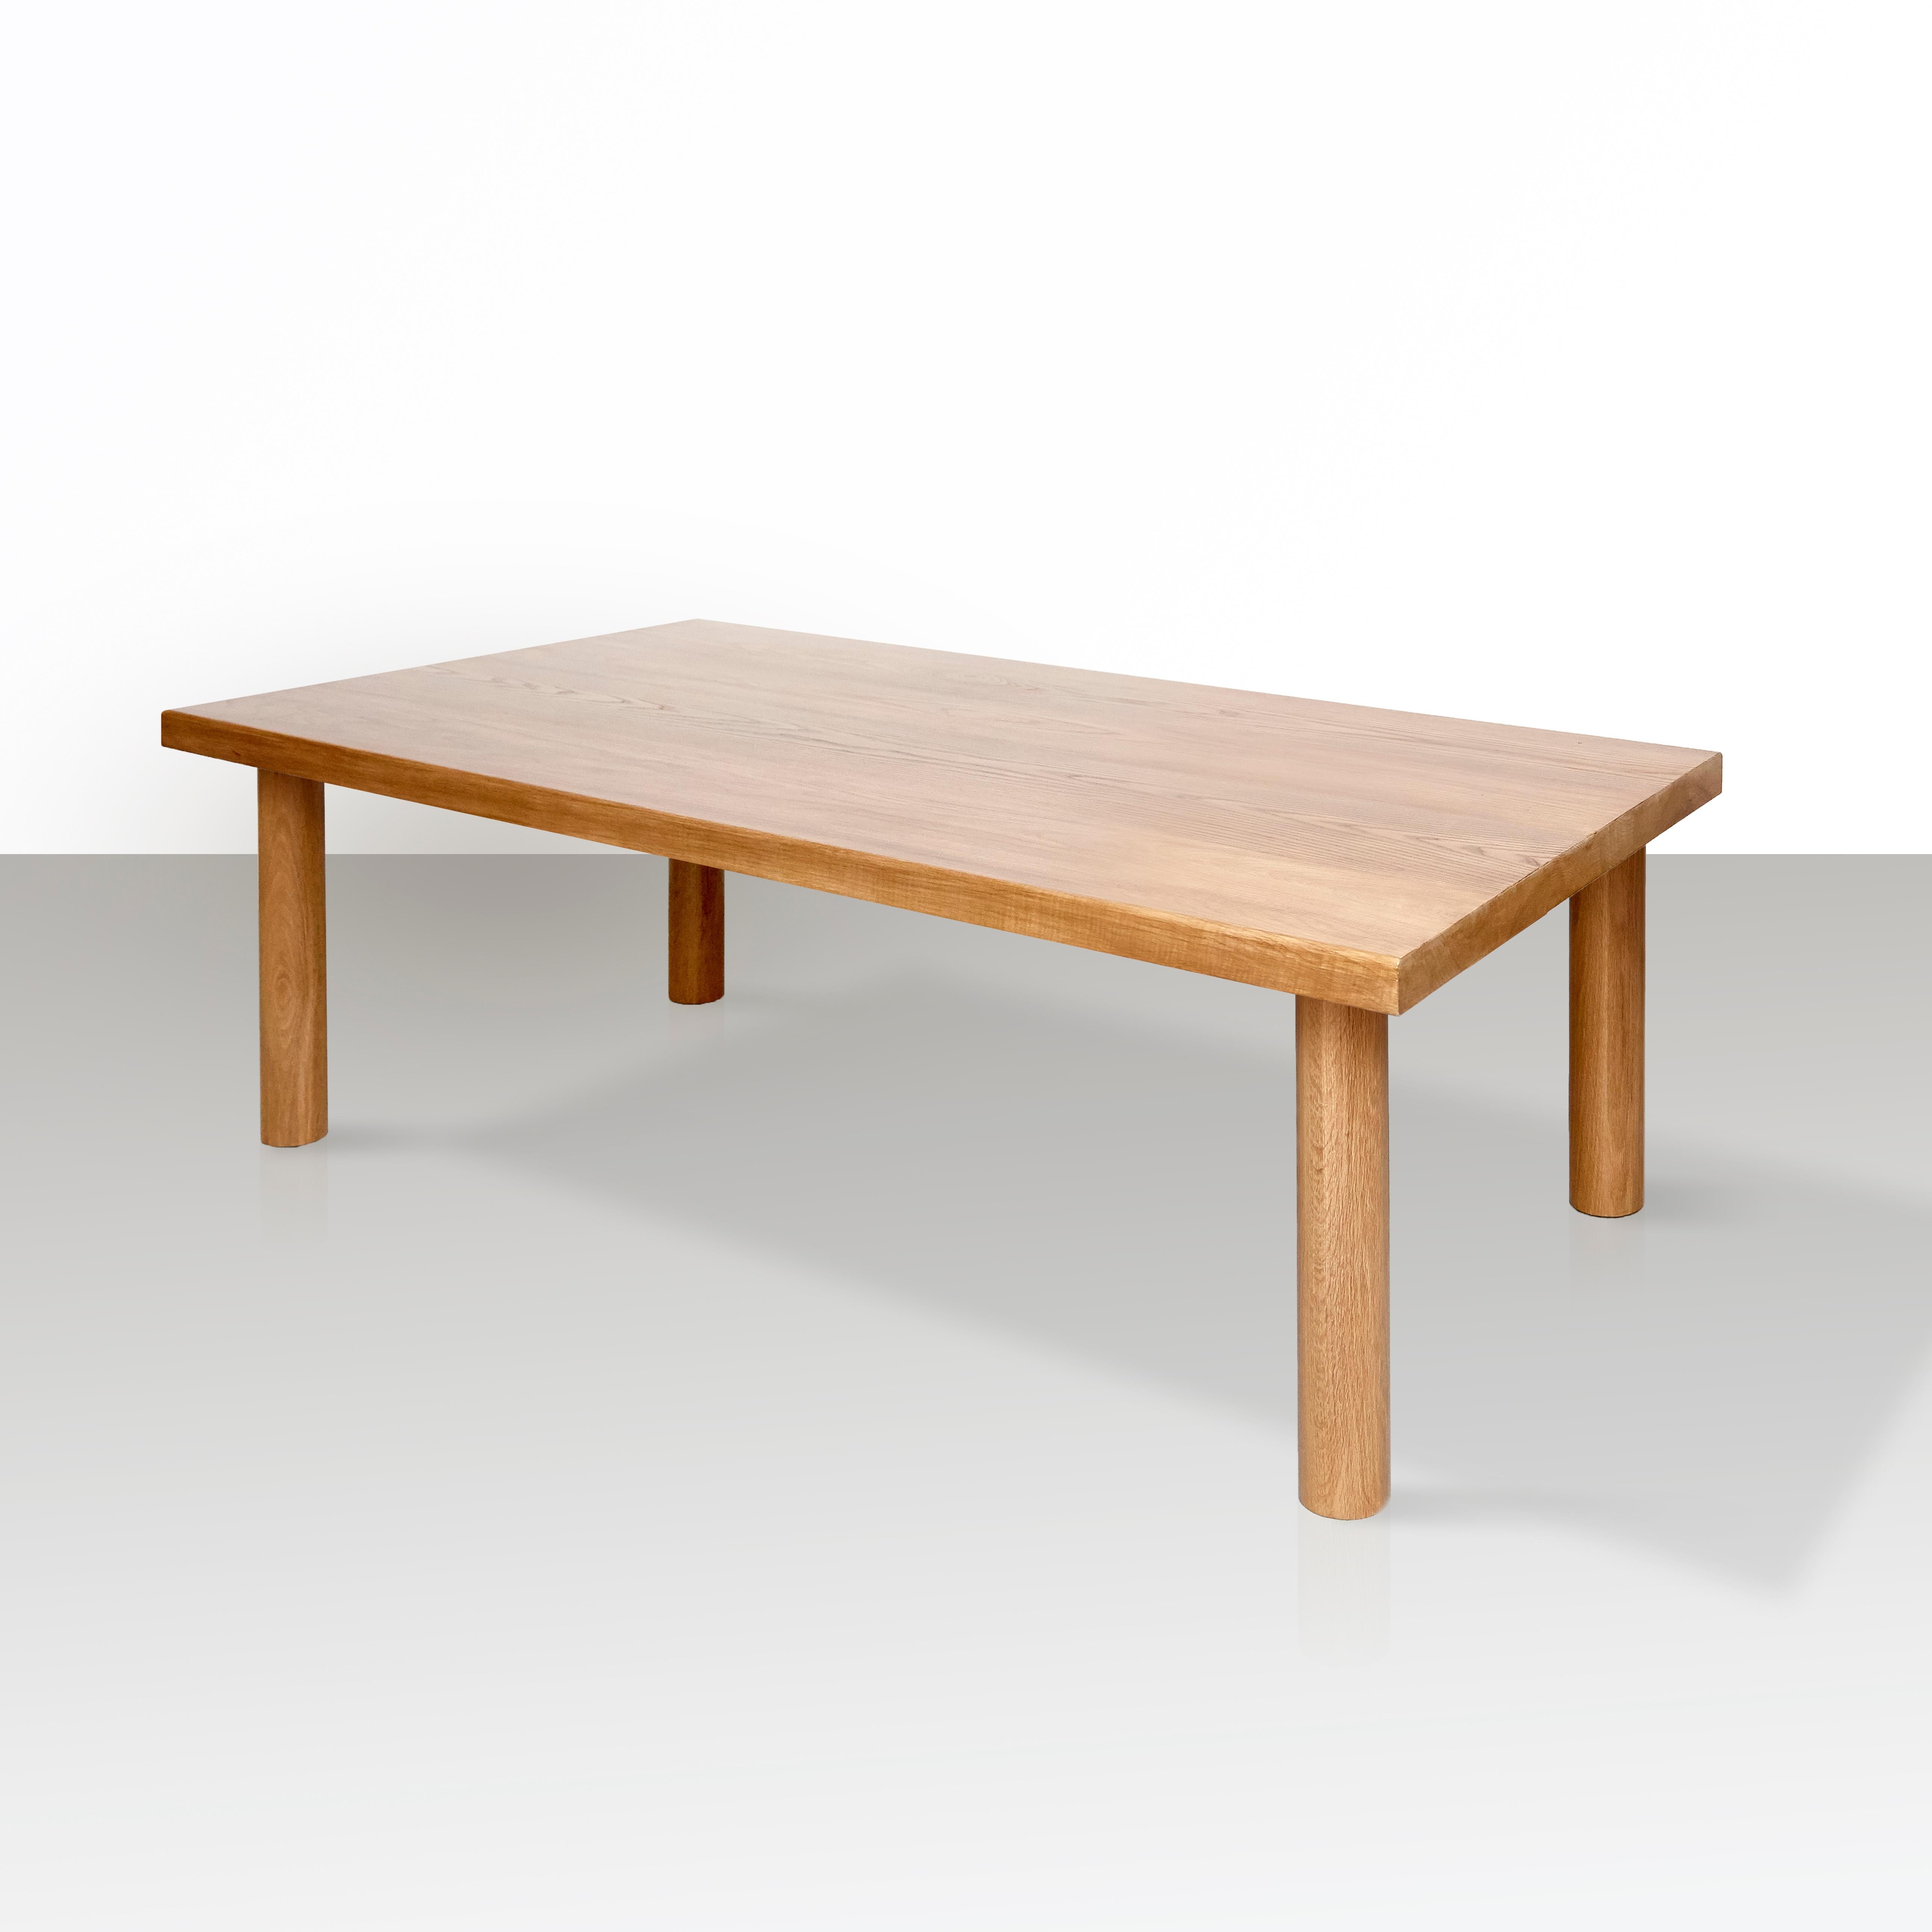 Large dining table by Dada est. manufactured in Barcelona, 2017.

Solid ash tree 

Six people table

Measures: 112.5 cm D x 180 cm W x 75 cm H 

Production delay: 6-8 weeks
There is the possibility of making it in different measures and